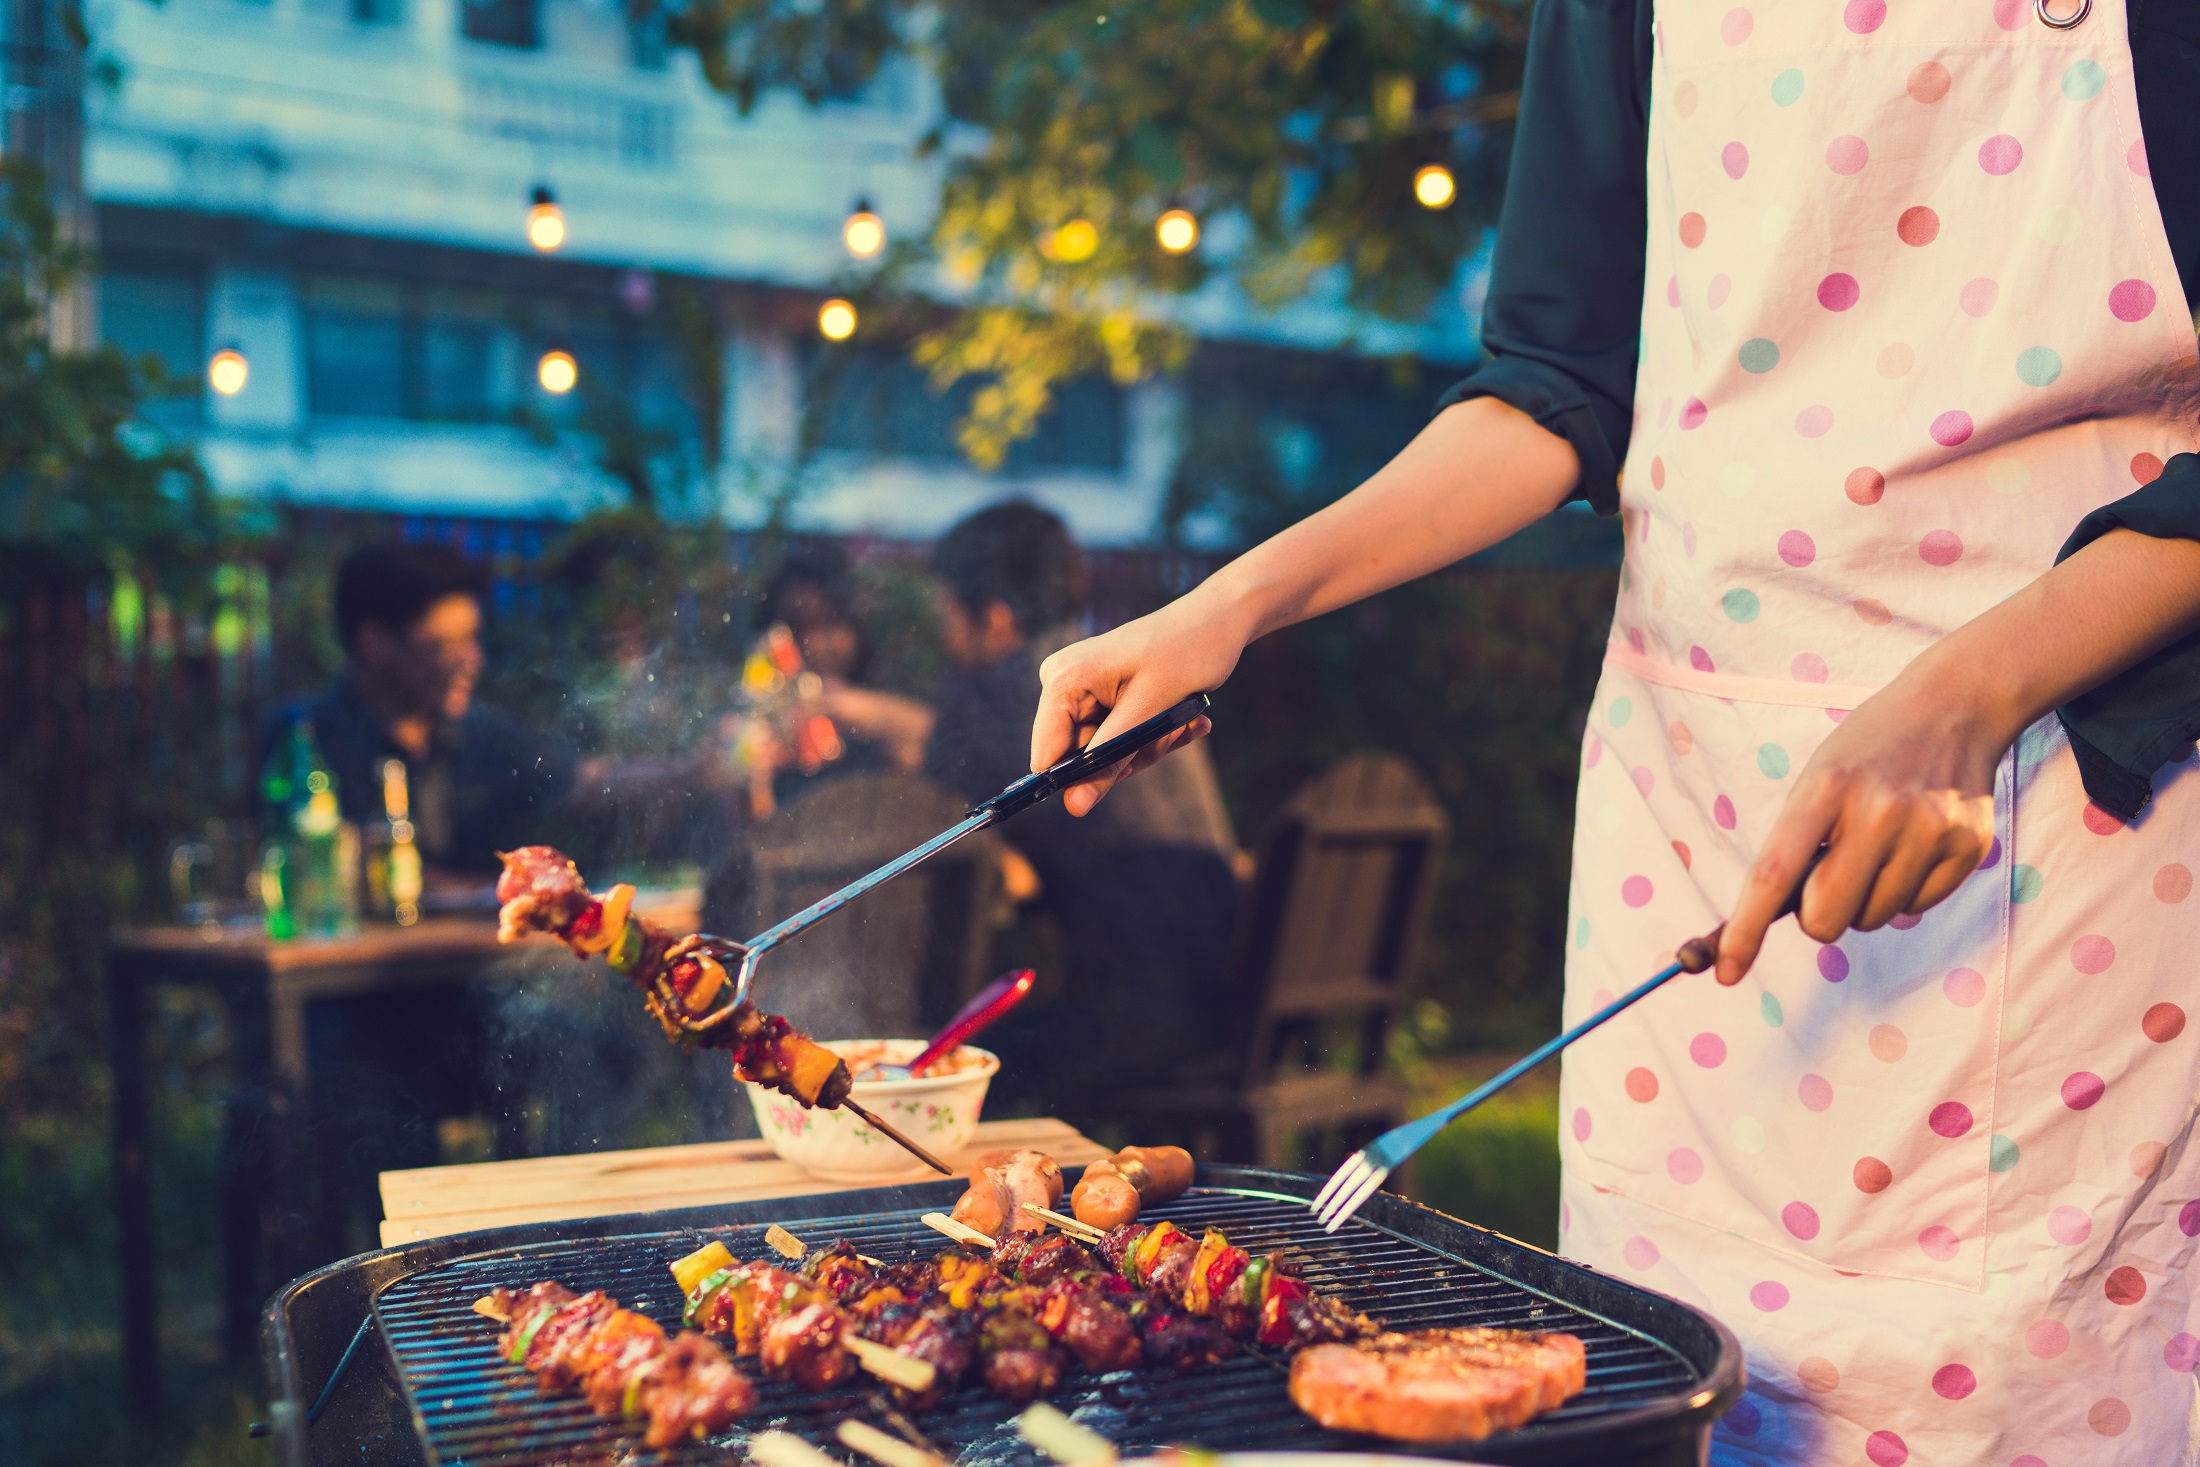 How to slim down your grill? Some practical tips